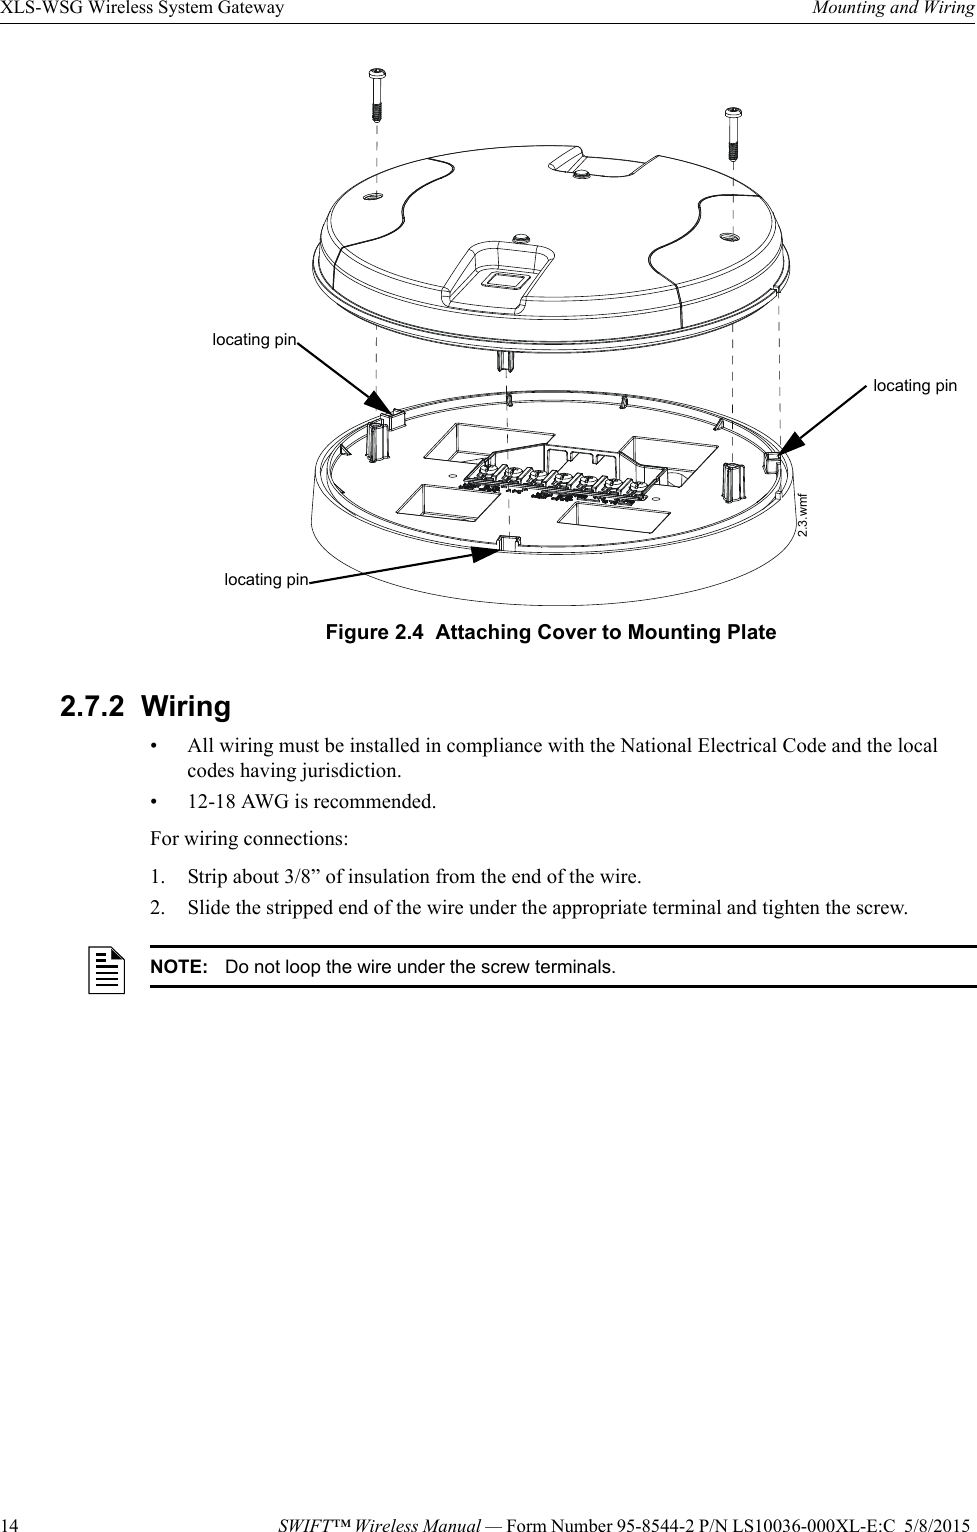 14 SWIFT™ Wireless Manual — Form Number 95-8544-2 P/N LS10036-000XL-E:C  5/8/2015 XLS-WSG Wireless System Gateway Mounting and Wiring2.7.2  Wiring• All wiring must be installed in compliance with the National Electrical Code and the local codes having jurisdiction.• 12-18 AWG is recommended.For wiring connections:1. Strip about 3/8” of insulation from the end of the wire.2. Slide the stripped end of the wire under the appropriate terminal and tighten the screw. Figure 2.4  Attaching Cover to Mounting Plate2.3.wmflocating pinlocating pinlocating pinNOTE: Do not loop the wire under the screw terminals.